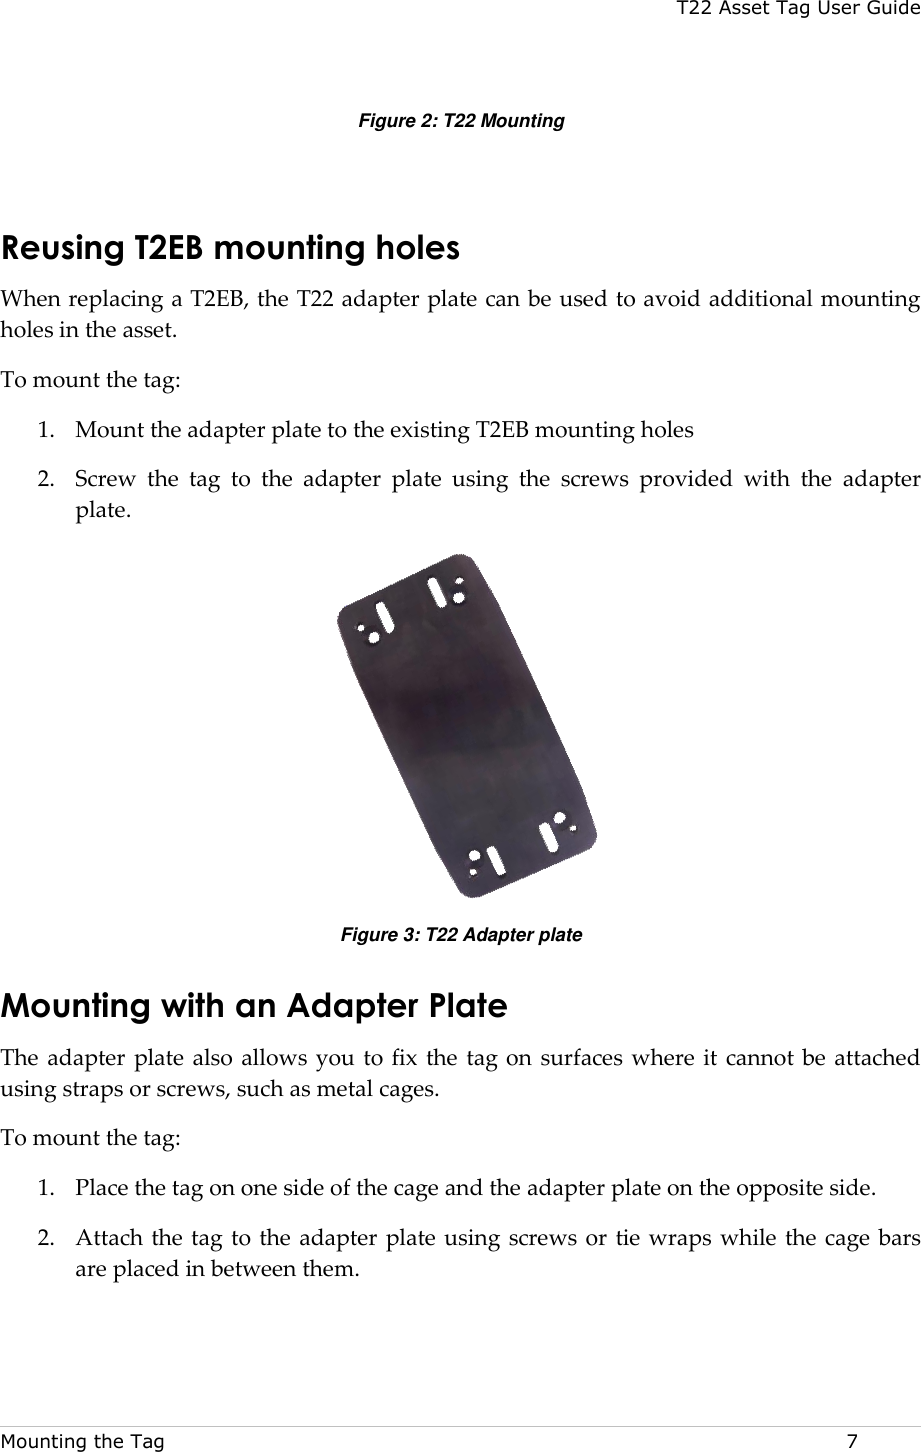 T22 Asset Tag User Guide Mounting the Tag  7 Figure 2: T22 Mounting  Reusing T2EB mounting holes  When replacing a T2EB, the T22 adapter plate can be used to avoid additional mounting holes in the asset.  To mount the tag:  1. Mount the adapter plate to the existing T2EB mounting holes 2. Screw  the  tag  to  the  adapter  plate  using  the  screws  provided  with  the  adapter plate.  Figure 3: T22 Adapter plate Mounting with an Adapter Plate  The adapter plate also  allows you  to fix the tag on  surfaces where  it cannot be attached using straps or screws, such as metal cages.  To mount the tag:  1. Place the tag on one side of the cage and the adapter plate on the opposite side.  2. Attach the tag to the adapter plate using screws or tie wraps while the cage bars are placed in between them.  